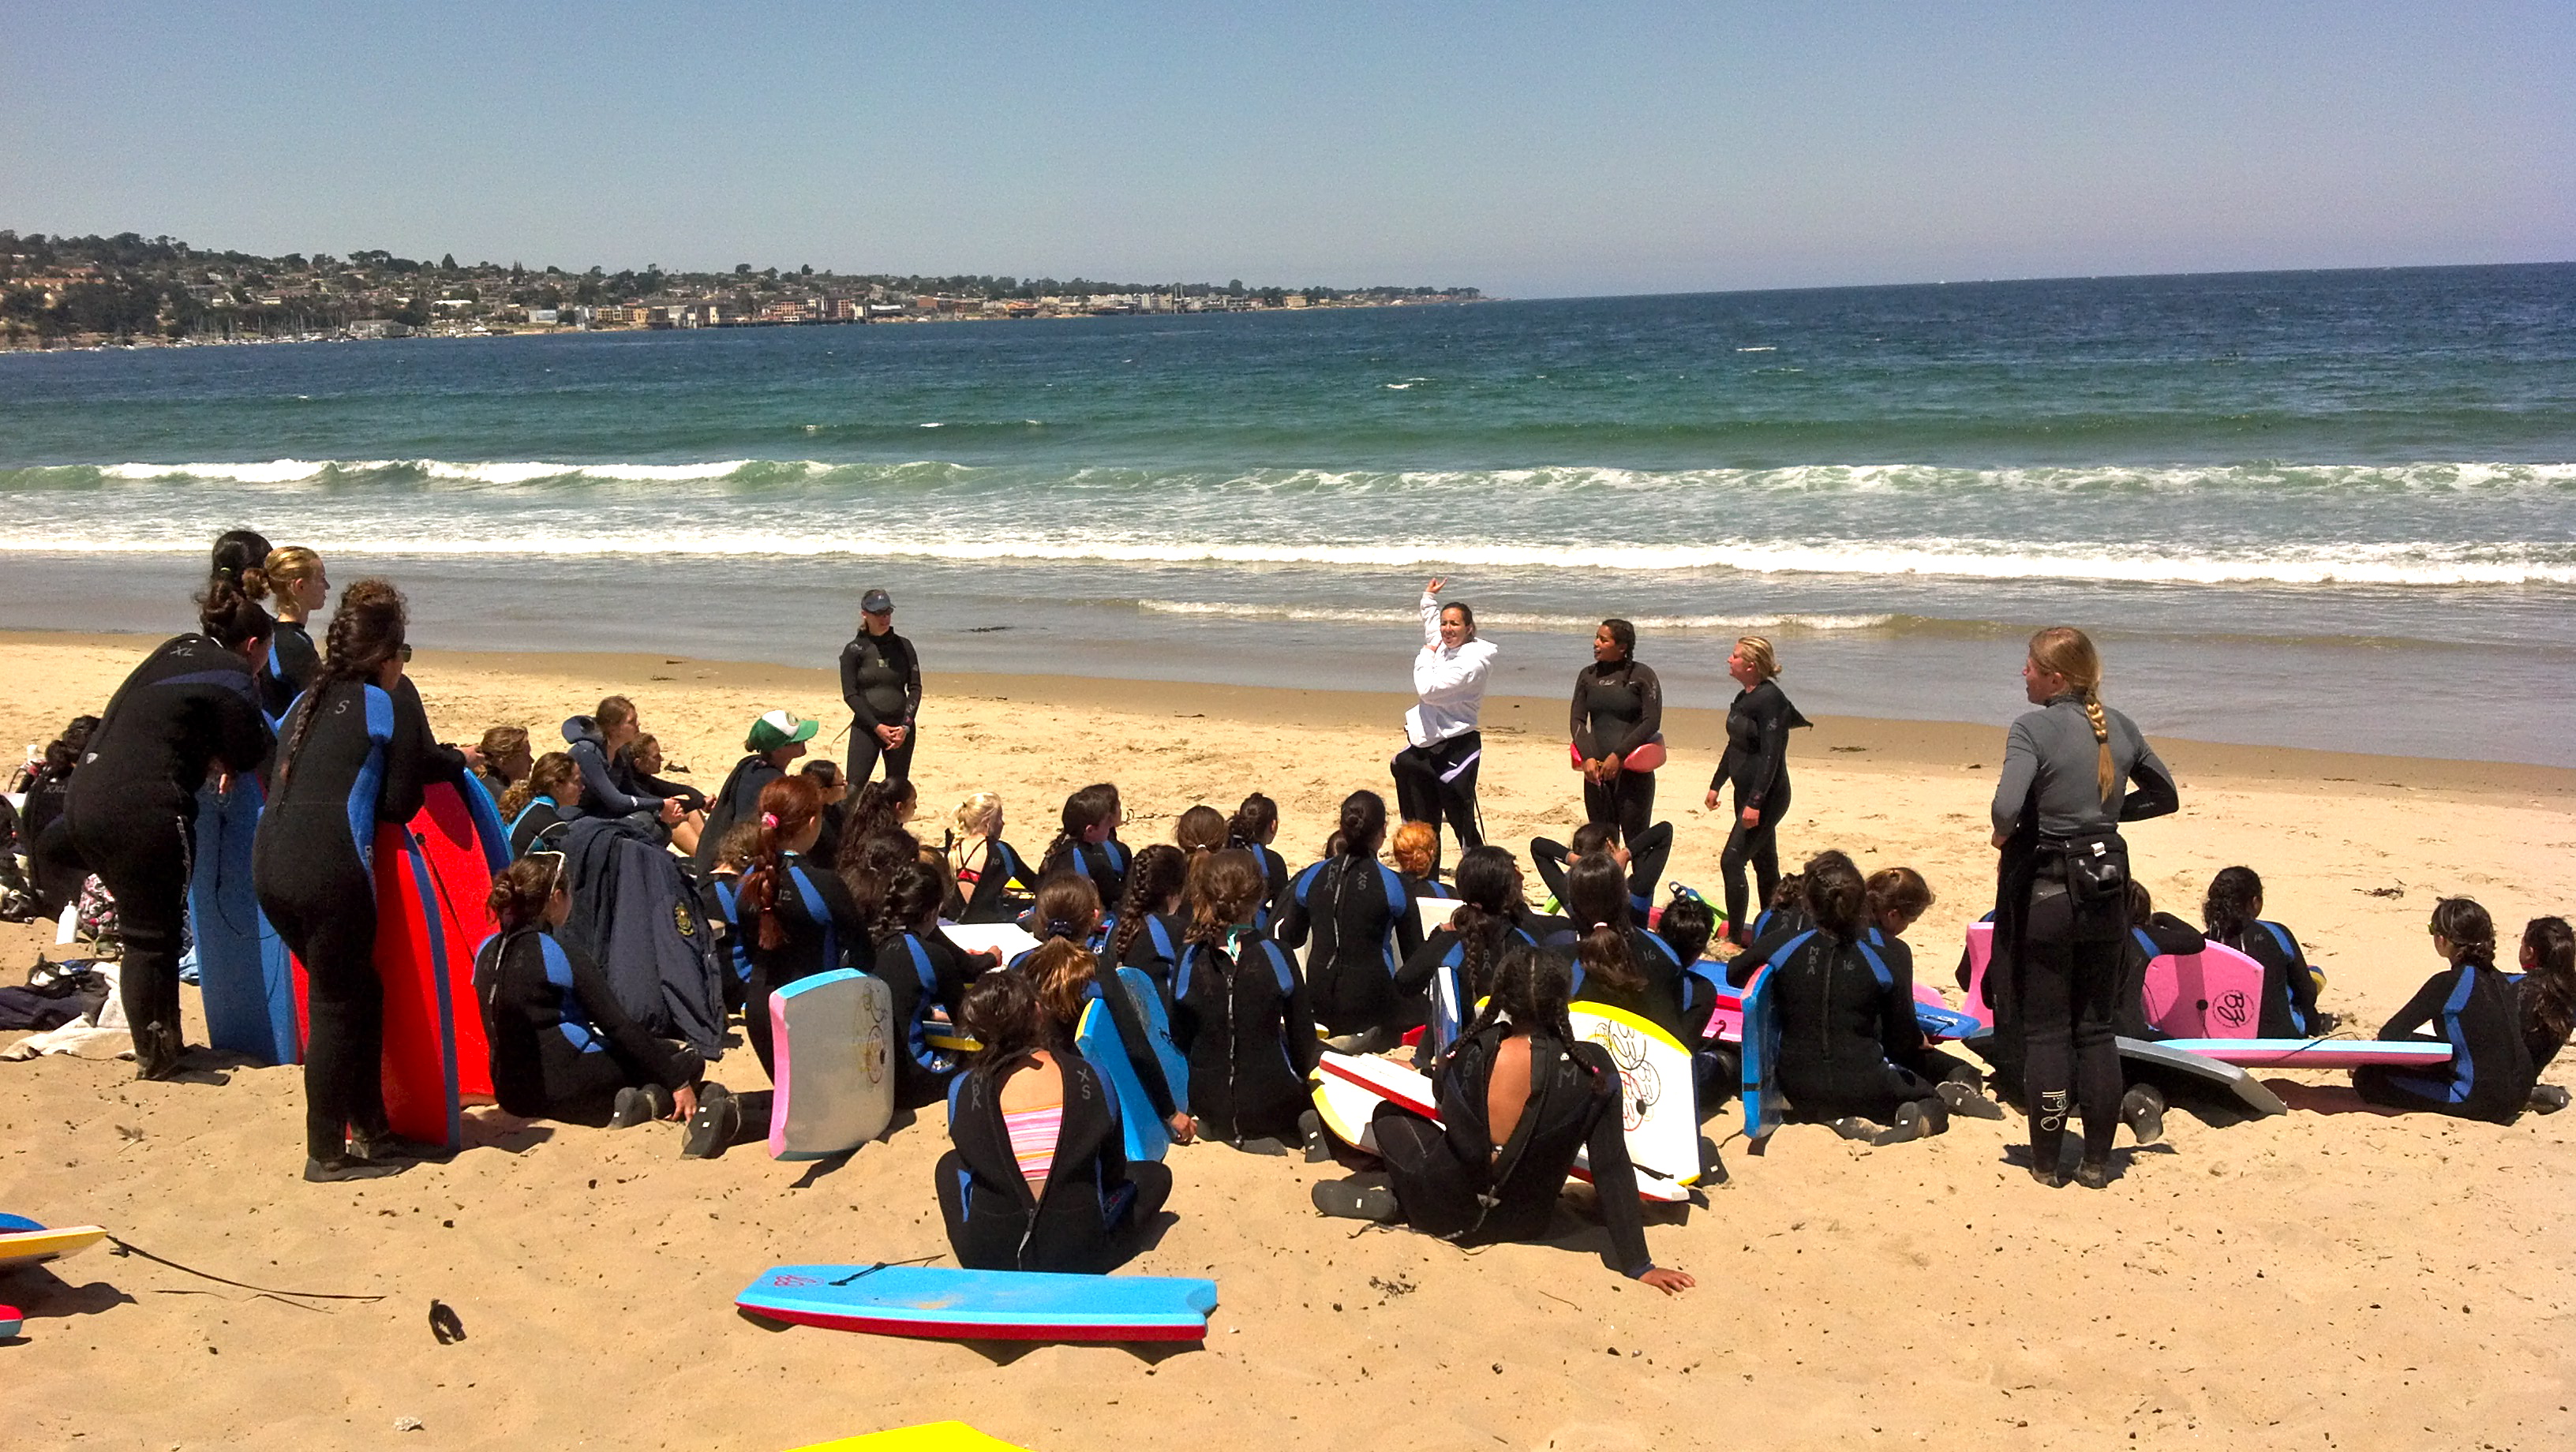 Lifeguards explaining some water safety ideas before we head into the water